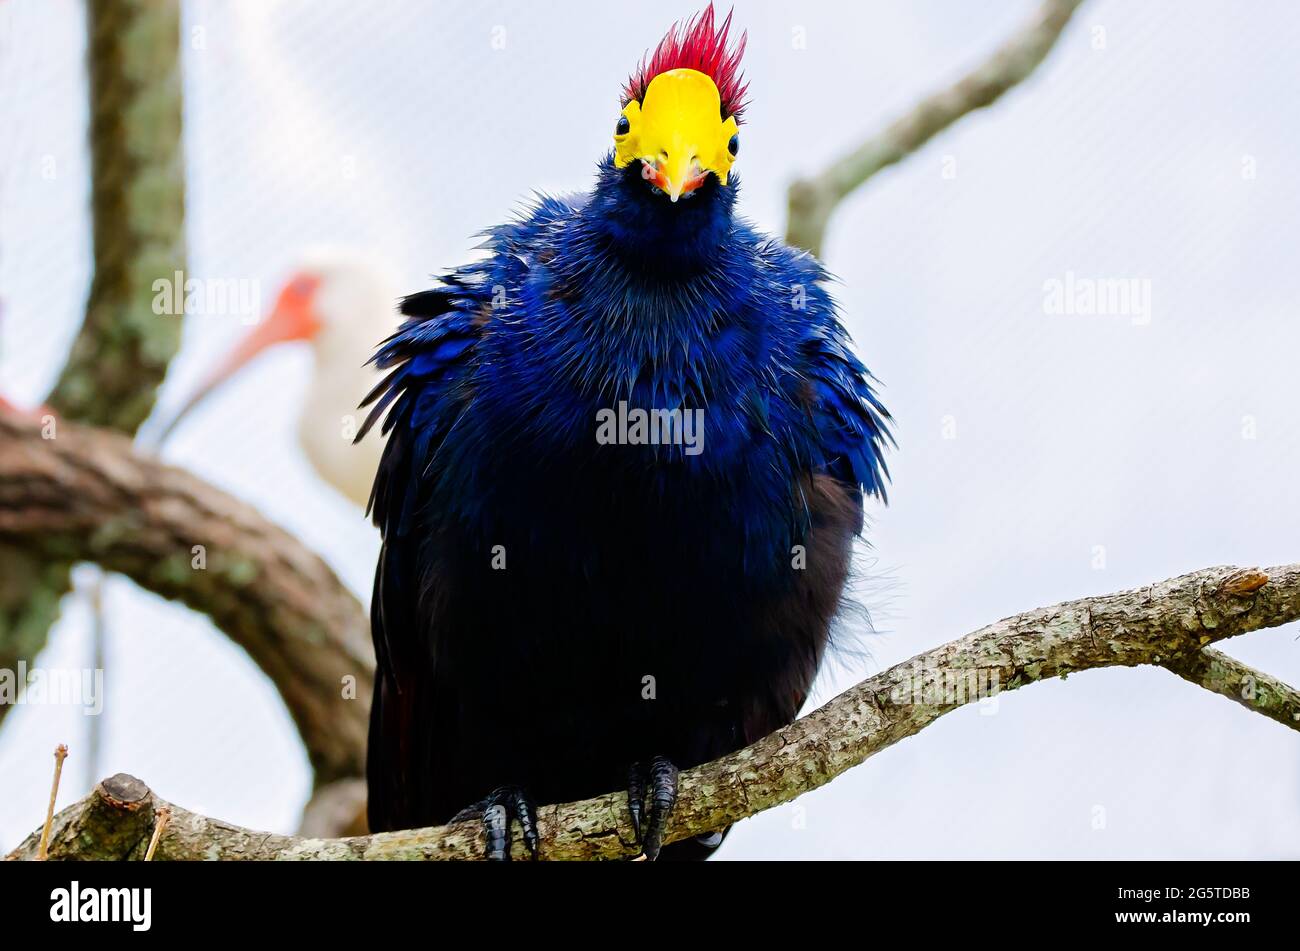 A female Lady Ross’s turaco enjoys the mister at the aviary at Mississippi Aquarium, June 24, 2021, in Gulfport, Mississippi. Stock Photo